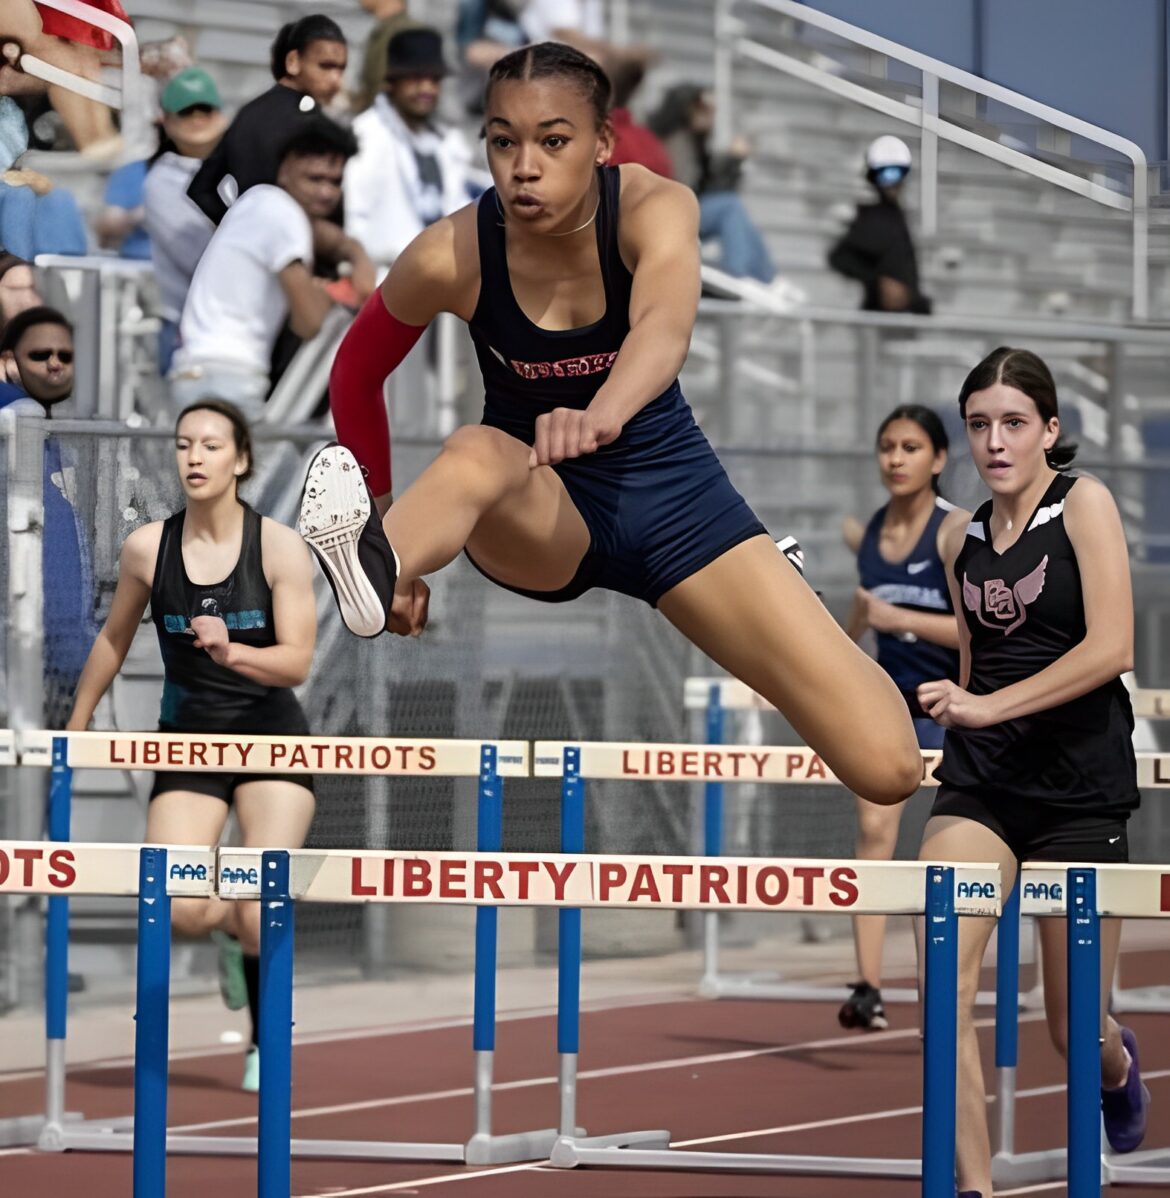 Sofia Lopes: The Inspiring 15-Year-Old Phenom Taking Track and Field by Storm